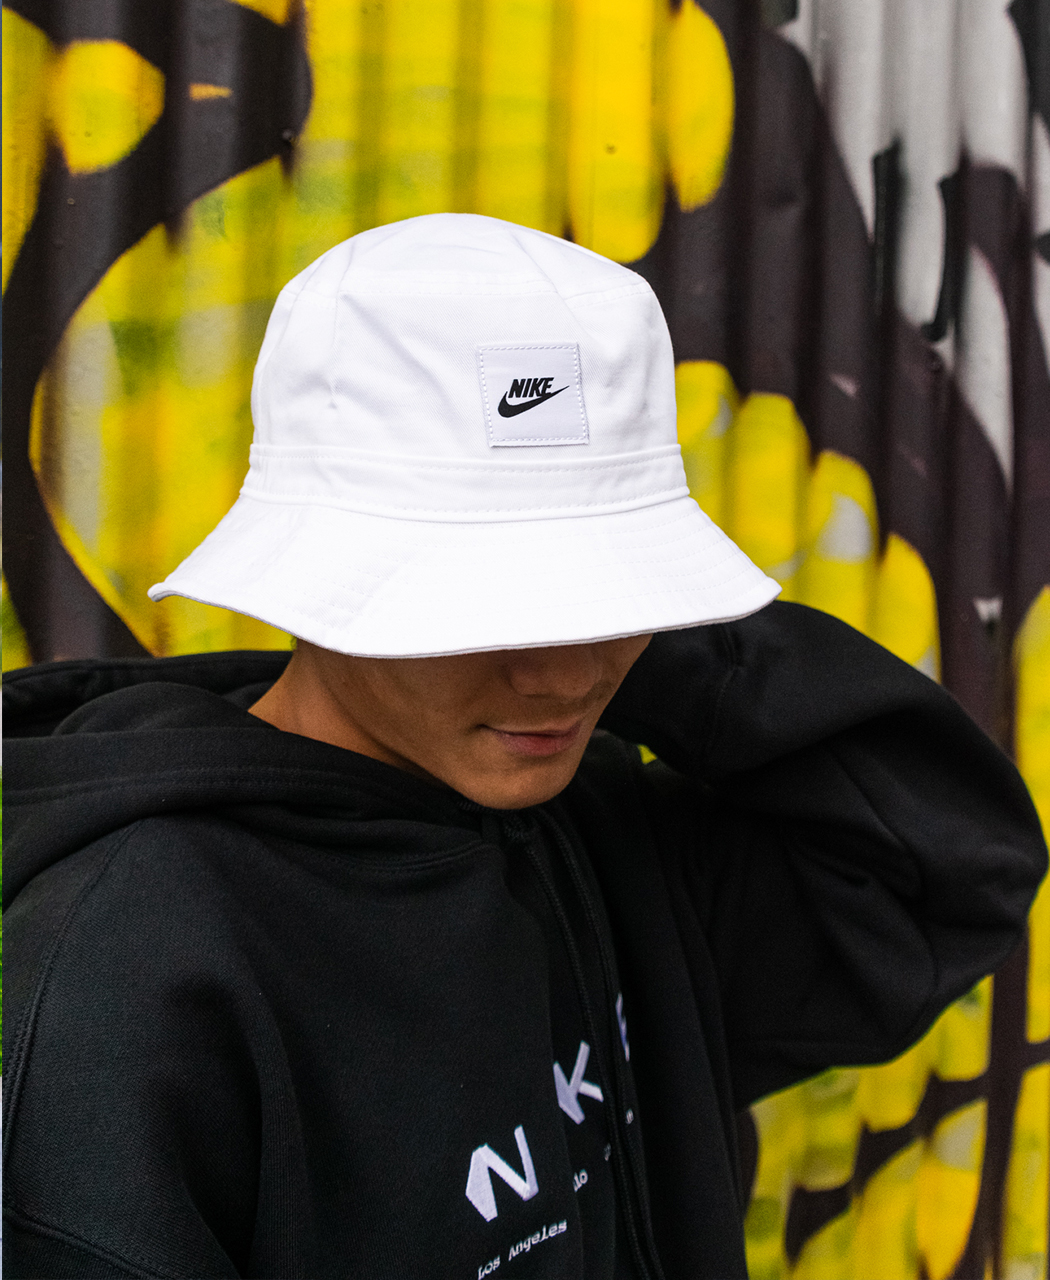 WHITE Skateboardings CORE Athens HAT | - Finest | Sold HATS SPORTSWEAR NIKE Color - out Skates BUCKET